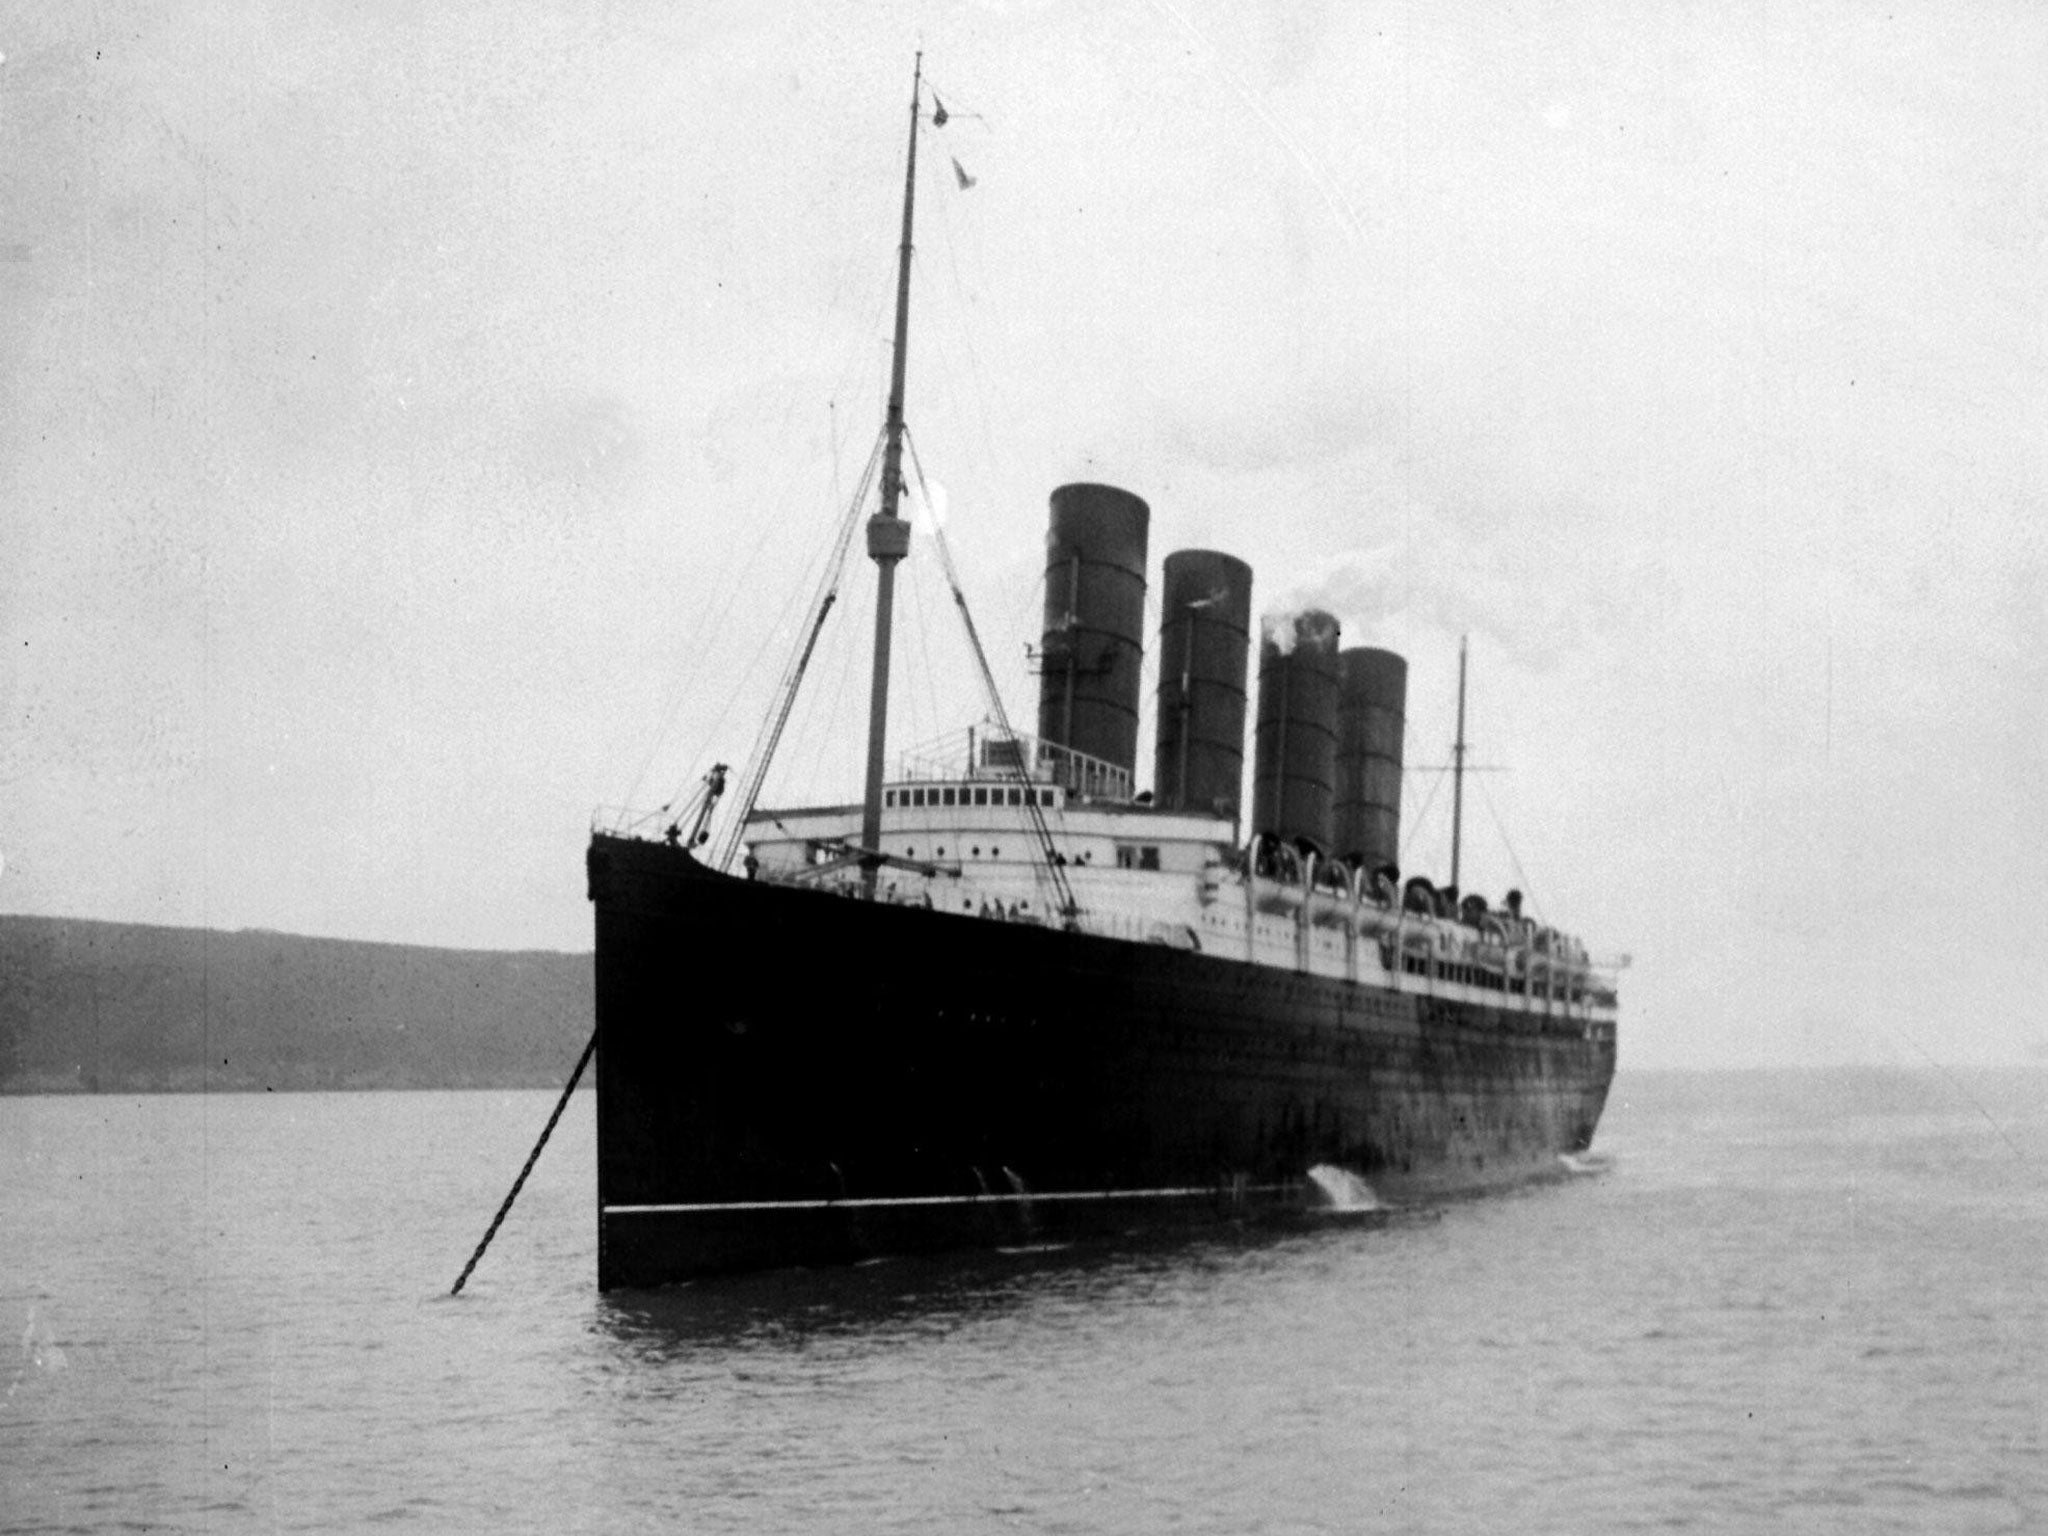 A History of the First World War in 100 Moments: The sinking of the ' Lusitania' torpedo that changed the course of war